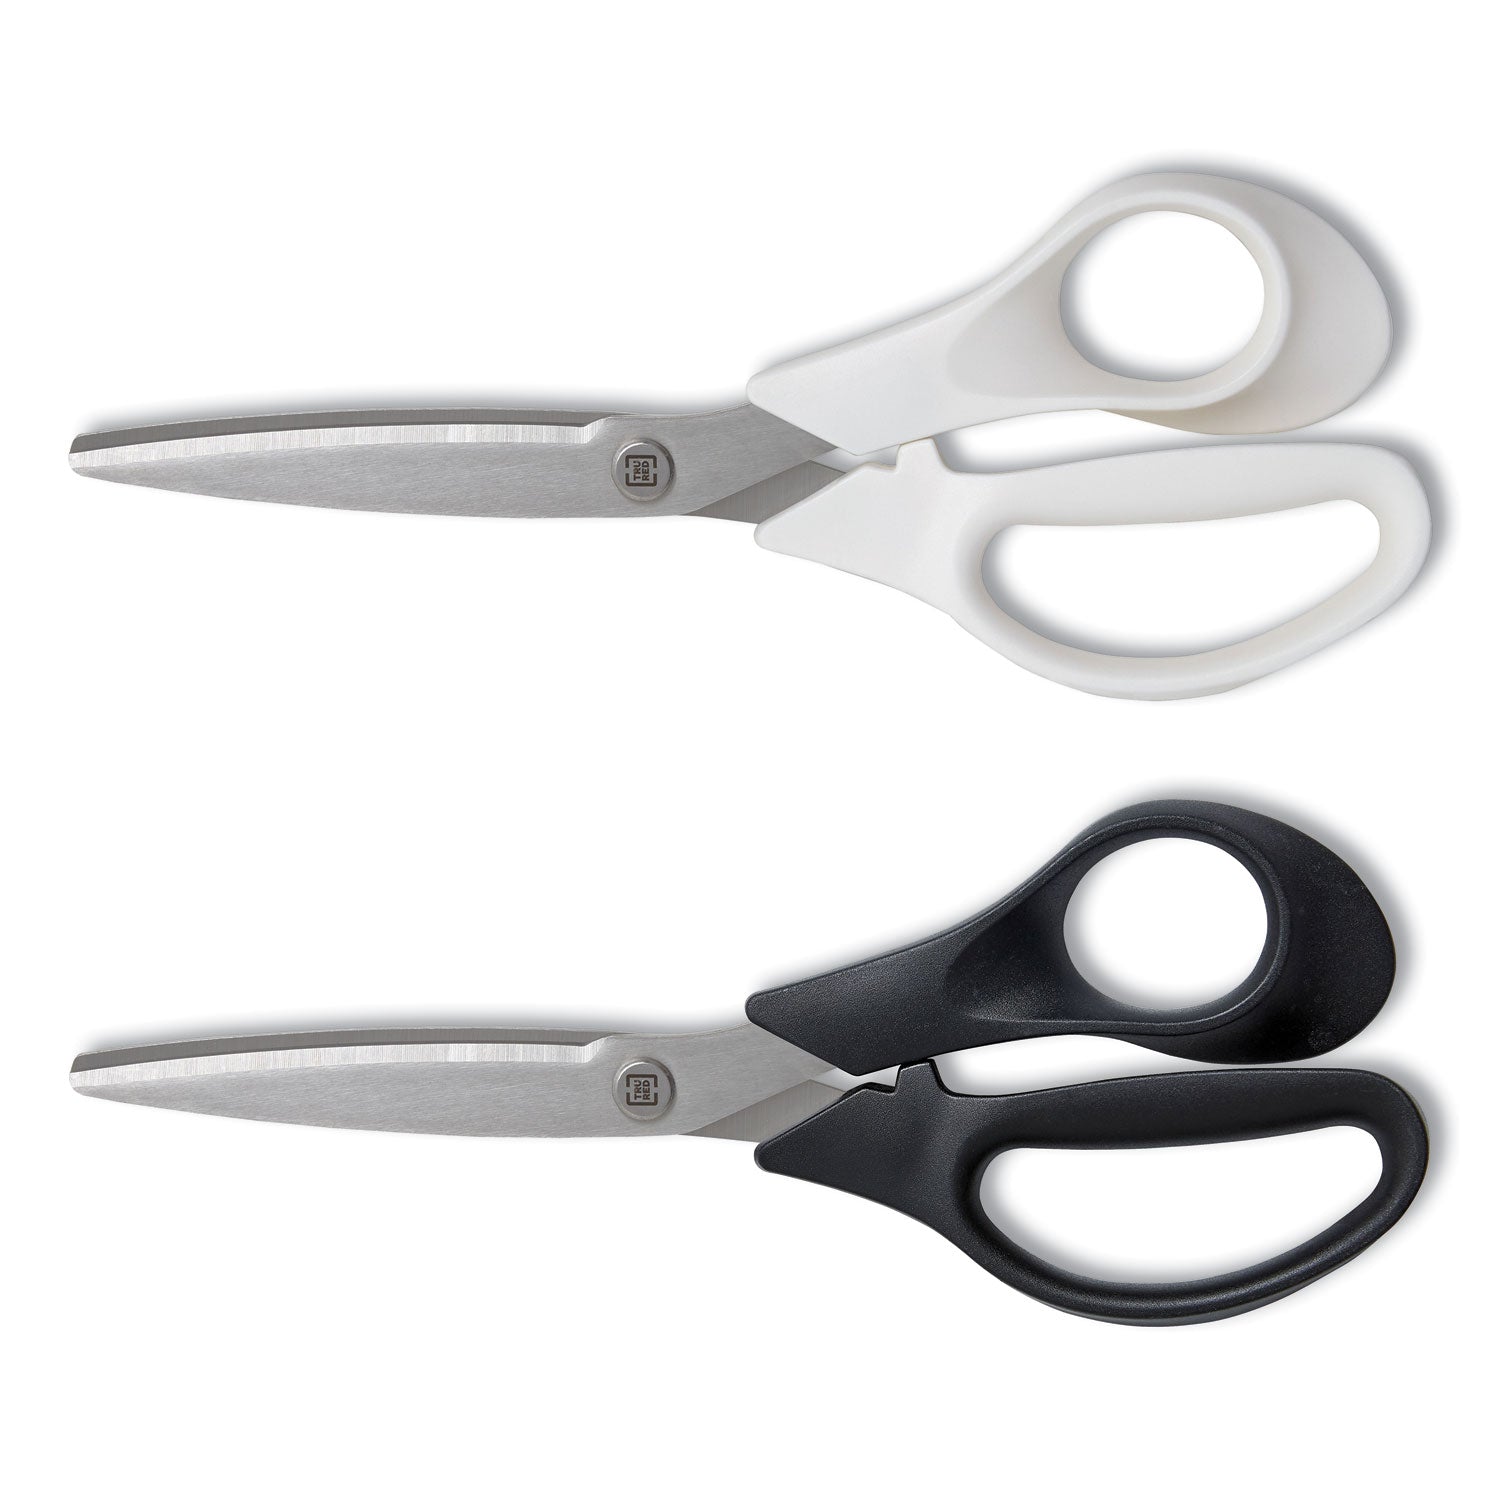 stainless-steel-scissors-8-long-358-cut-length-assorted-straight-handles-2-pack_tud24380494 - 1